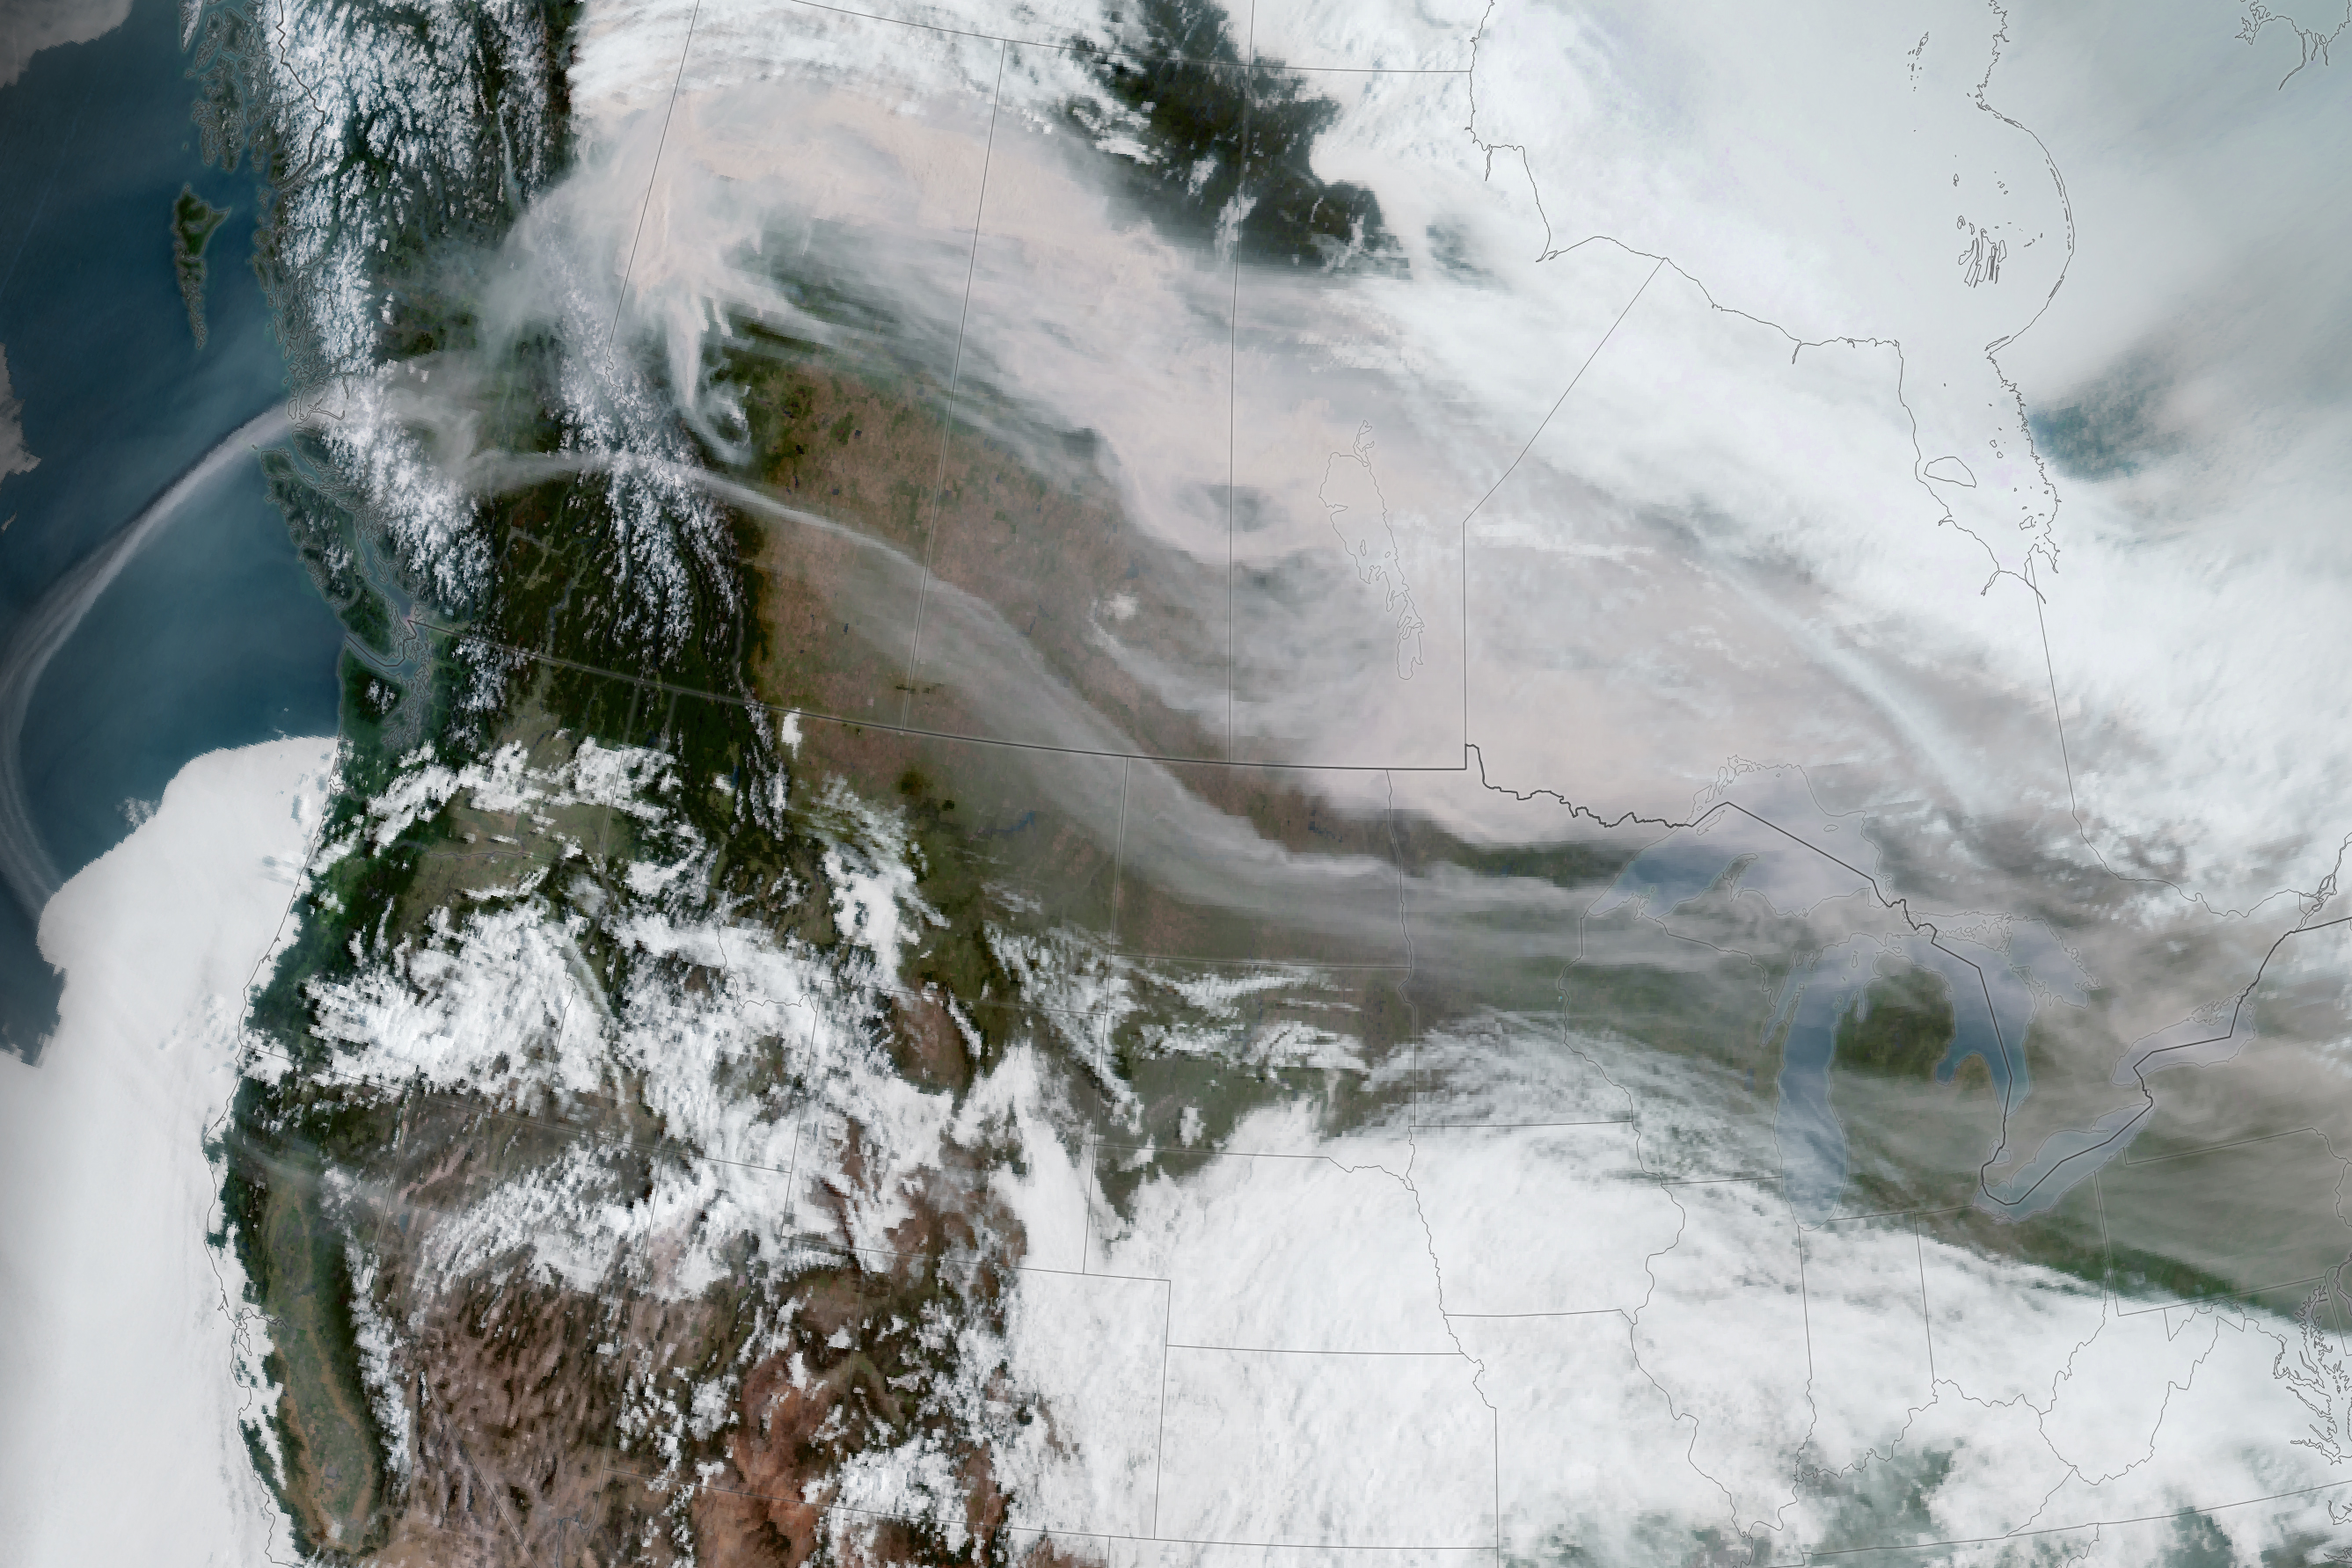 See a satellite view of wildfire smoke from Canada across the U.S. - The  Washington Post